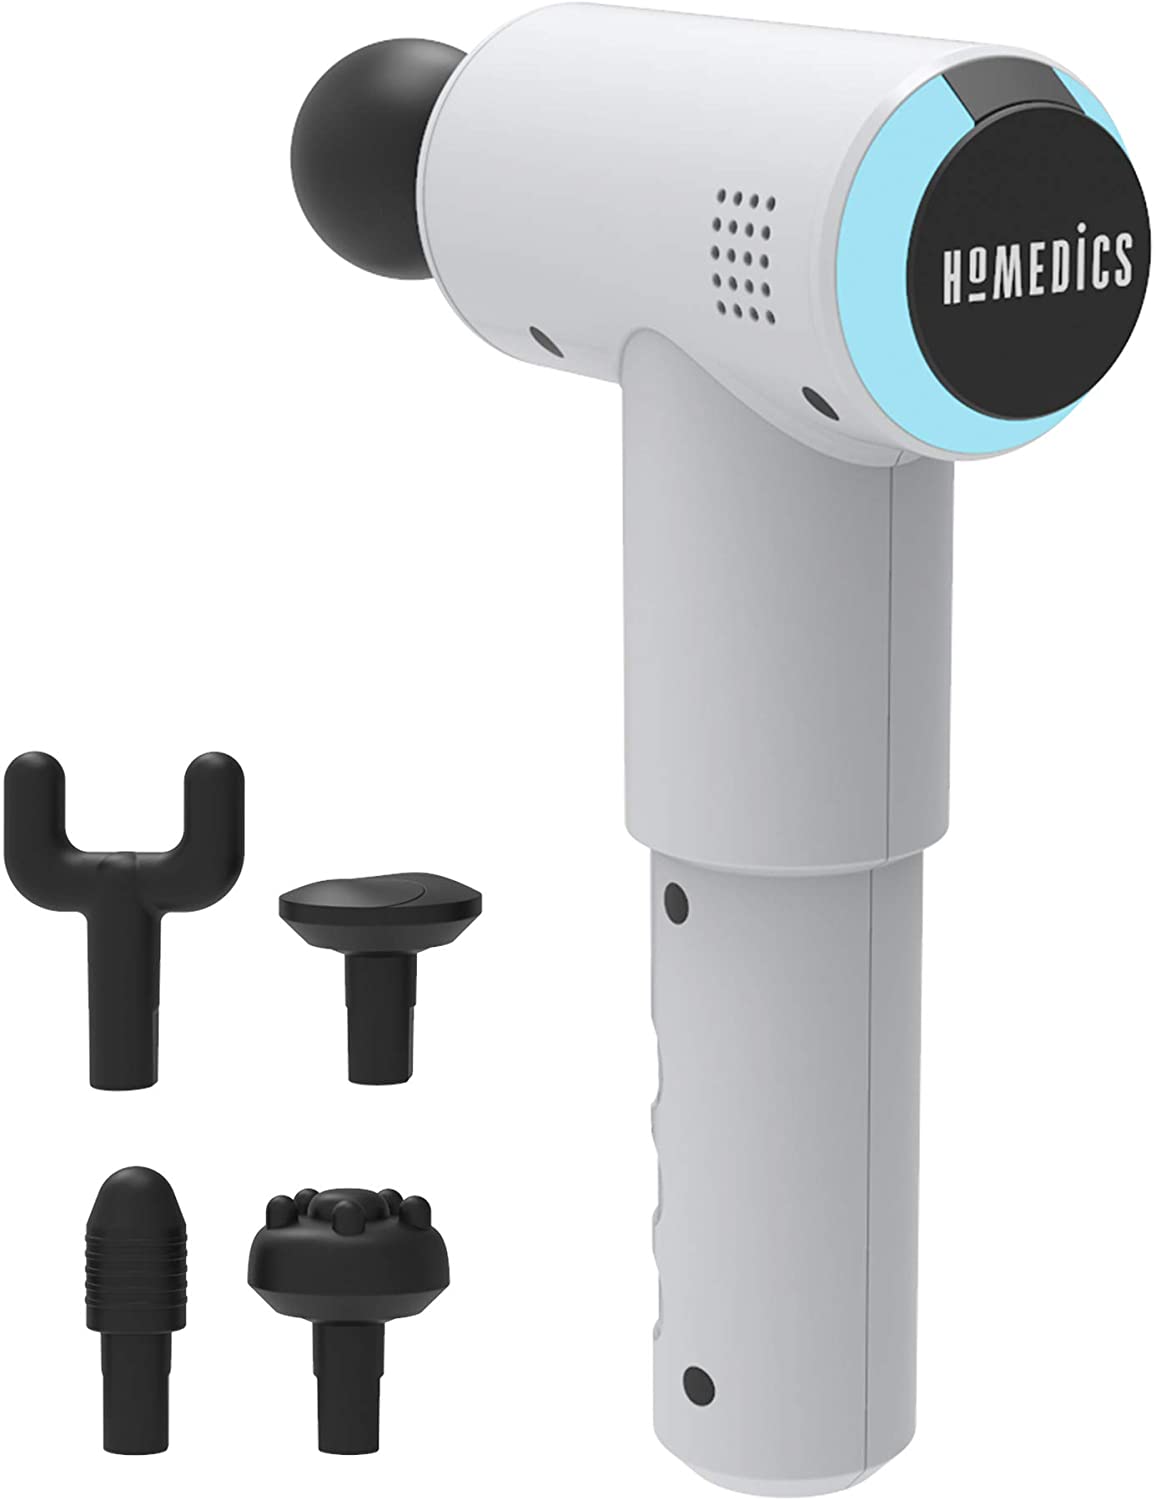 HoMedics Massage Gun for Deep Tissue Muscle Physio Therapy, Rechargeable Handheld Sports Massager